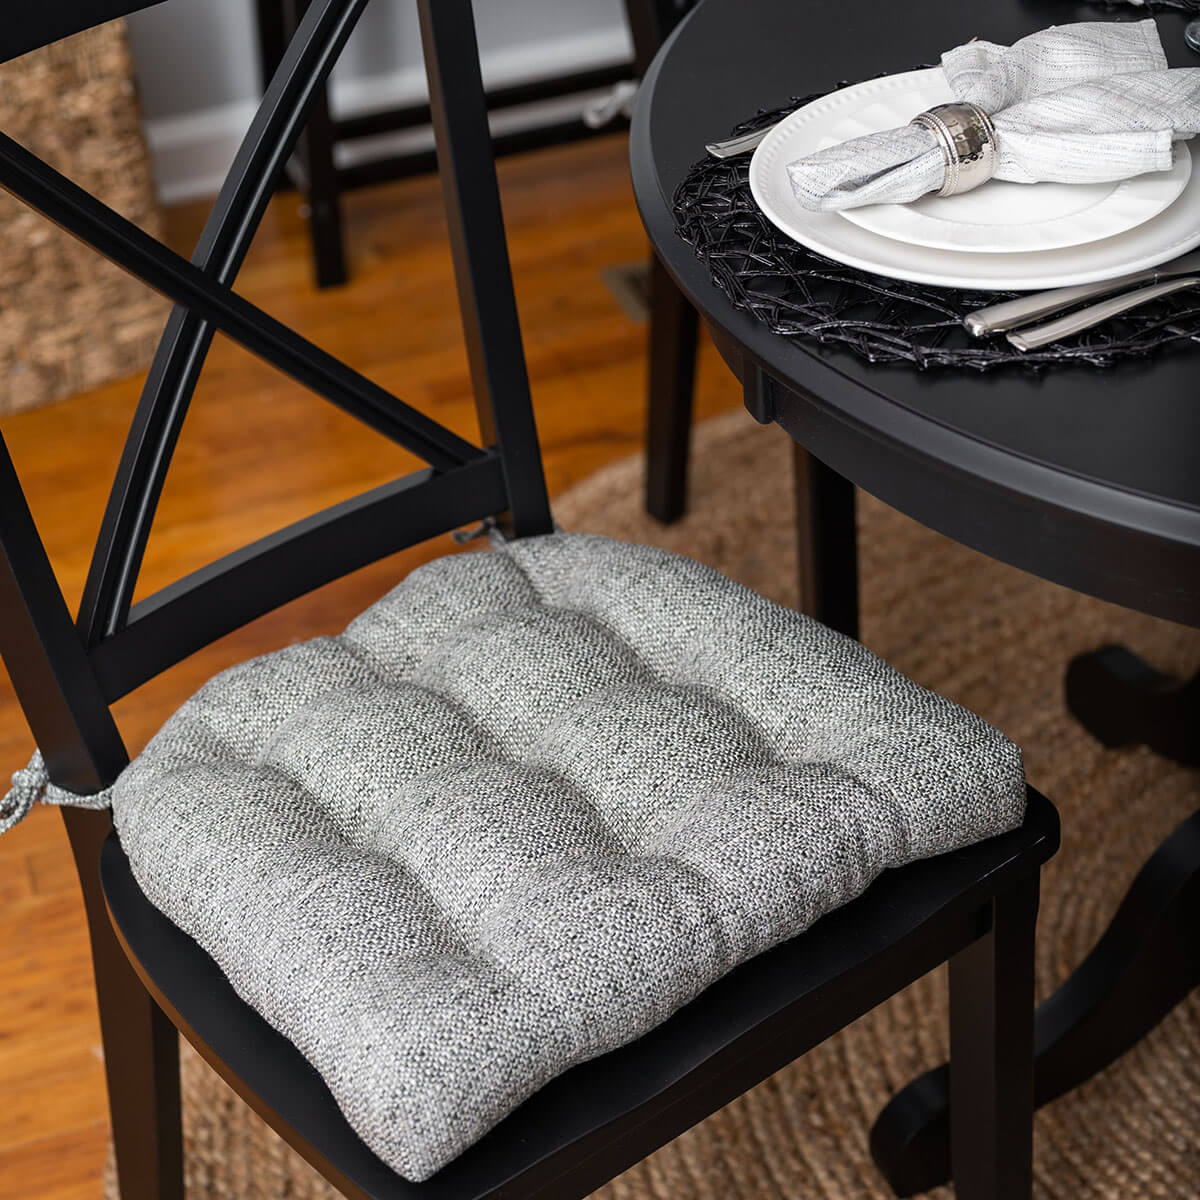 grey upholstered dining chair cushion at black dining room set for dinner party with silver place settings